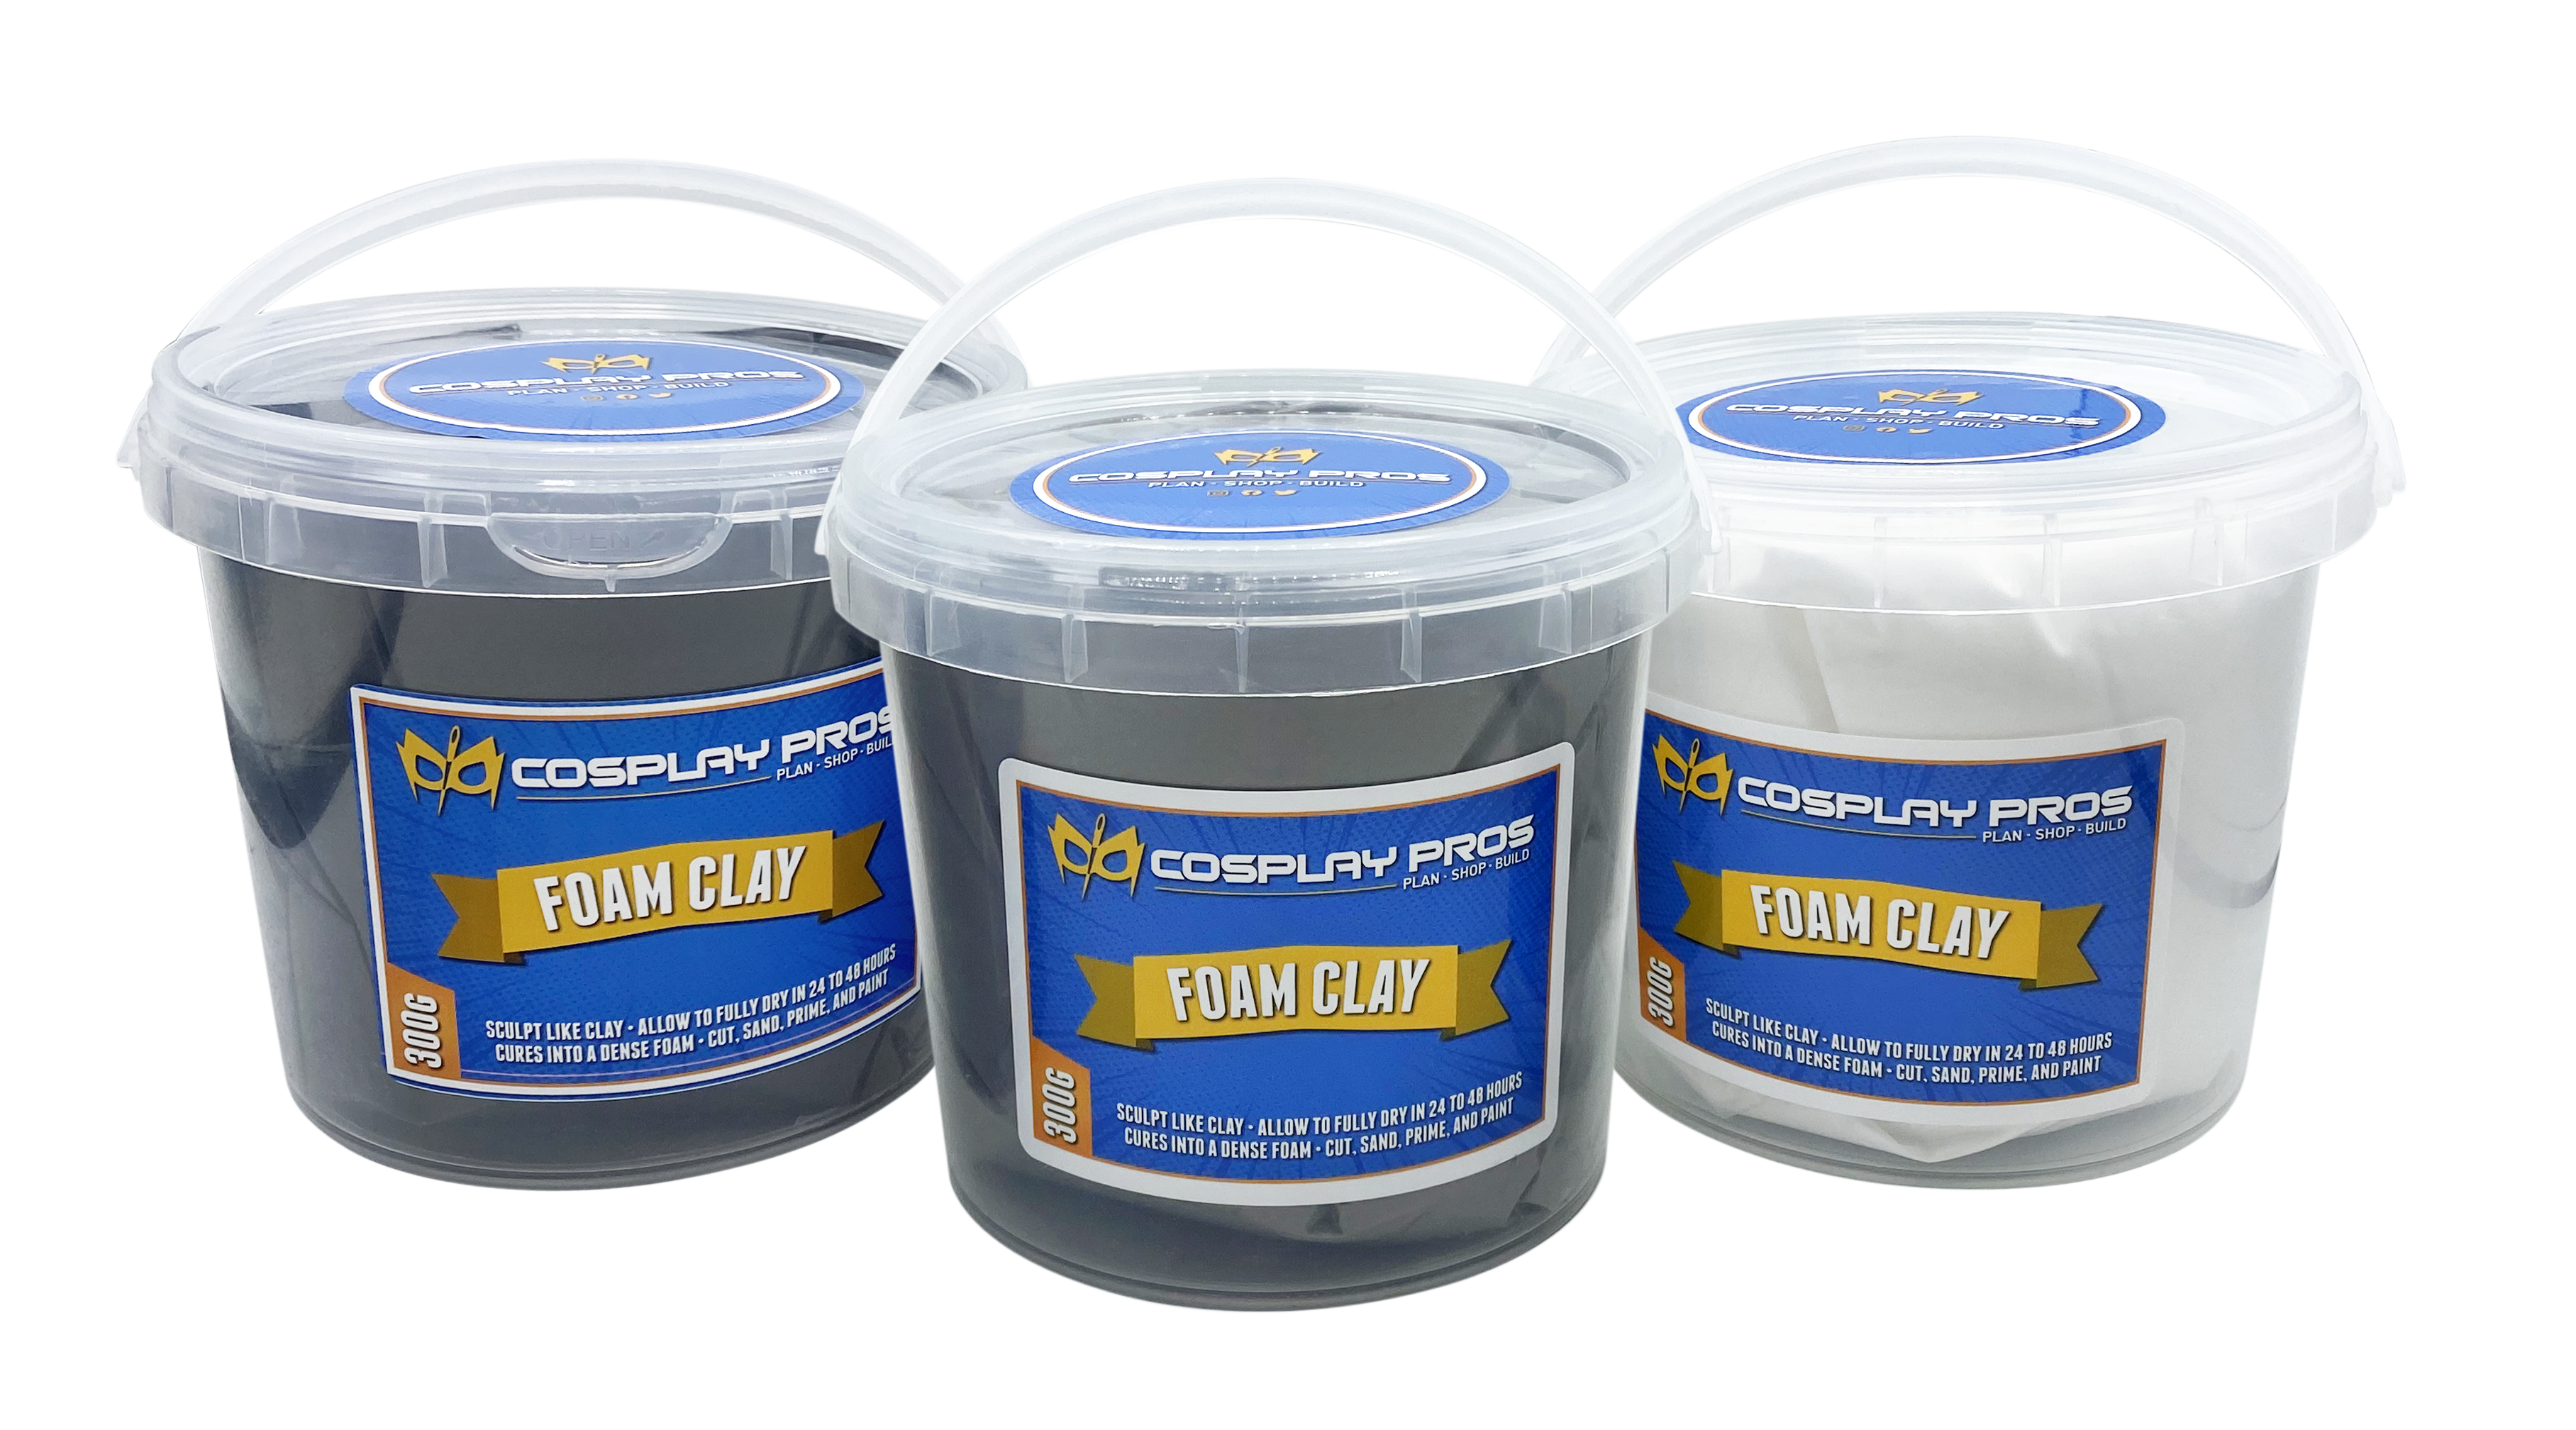 CALPALMY Moldable Cosplay Foam Clay (White) High Density and Hiqh Quality for Intricate Designs | Air Dries to Perfection for Cutting with A Knife or